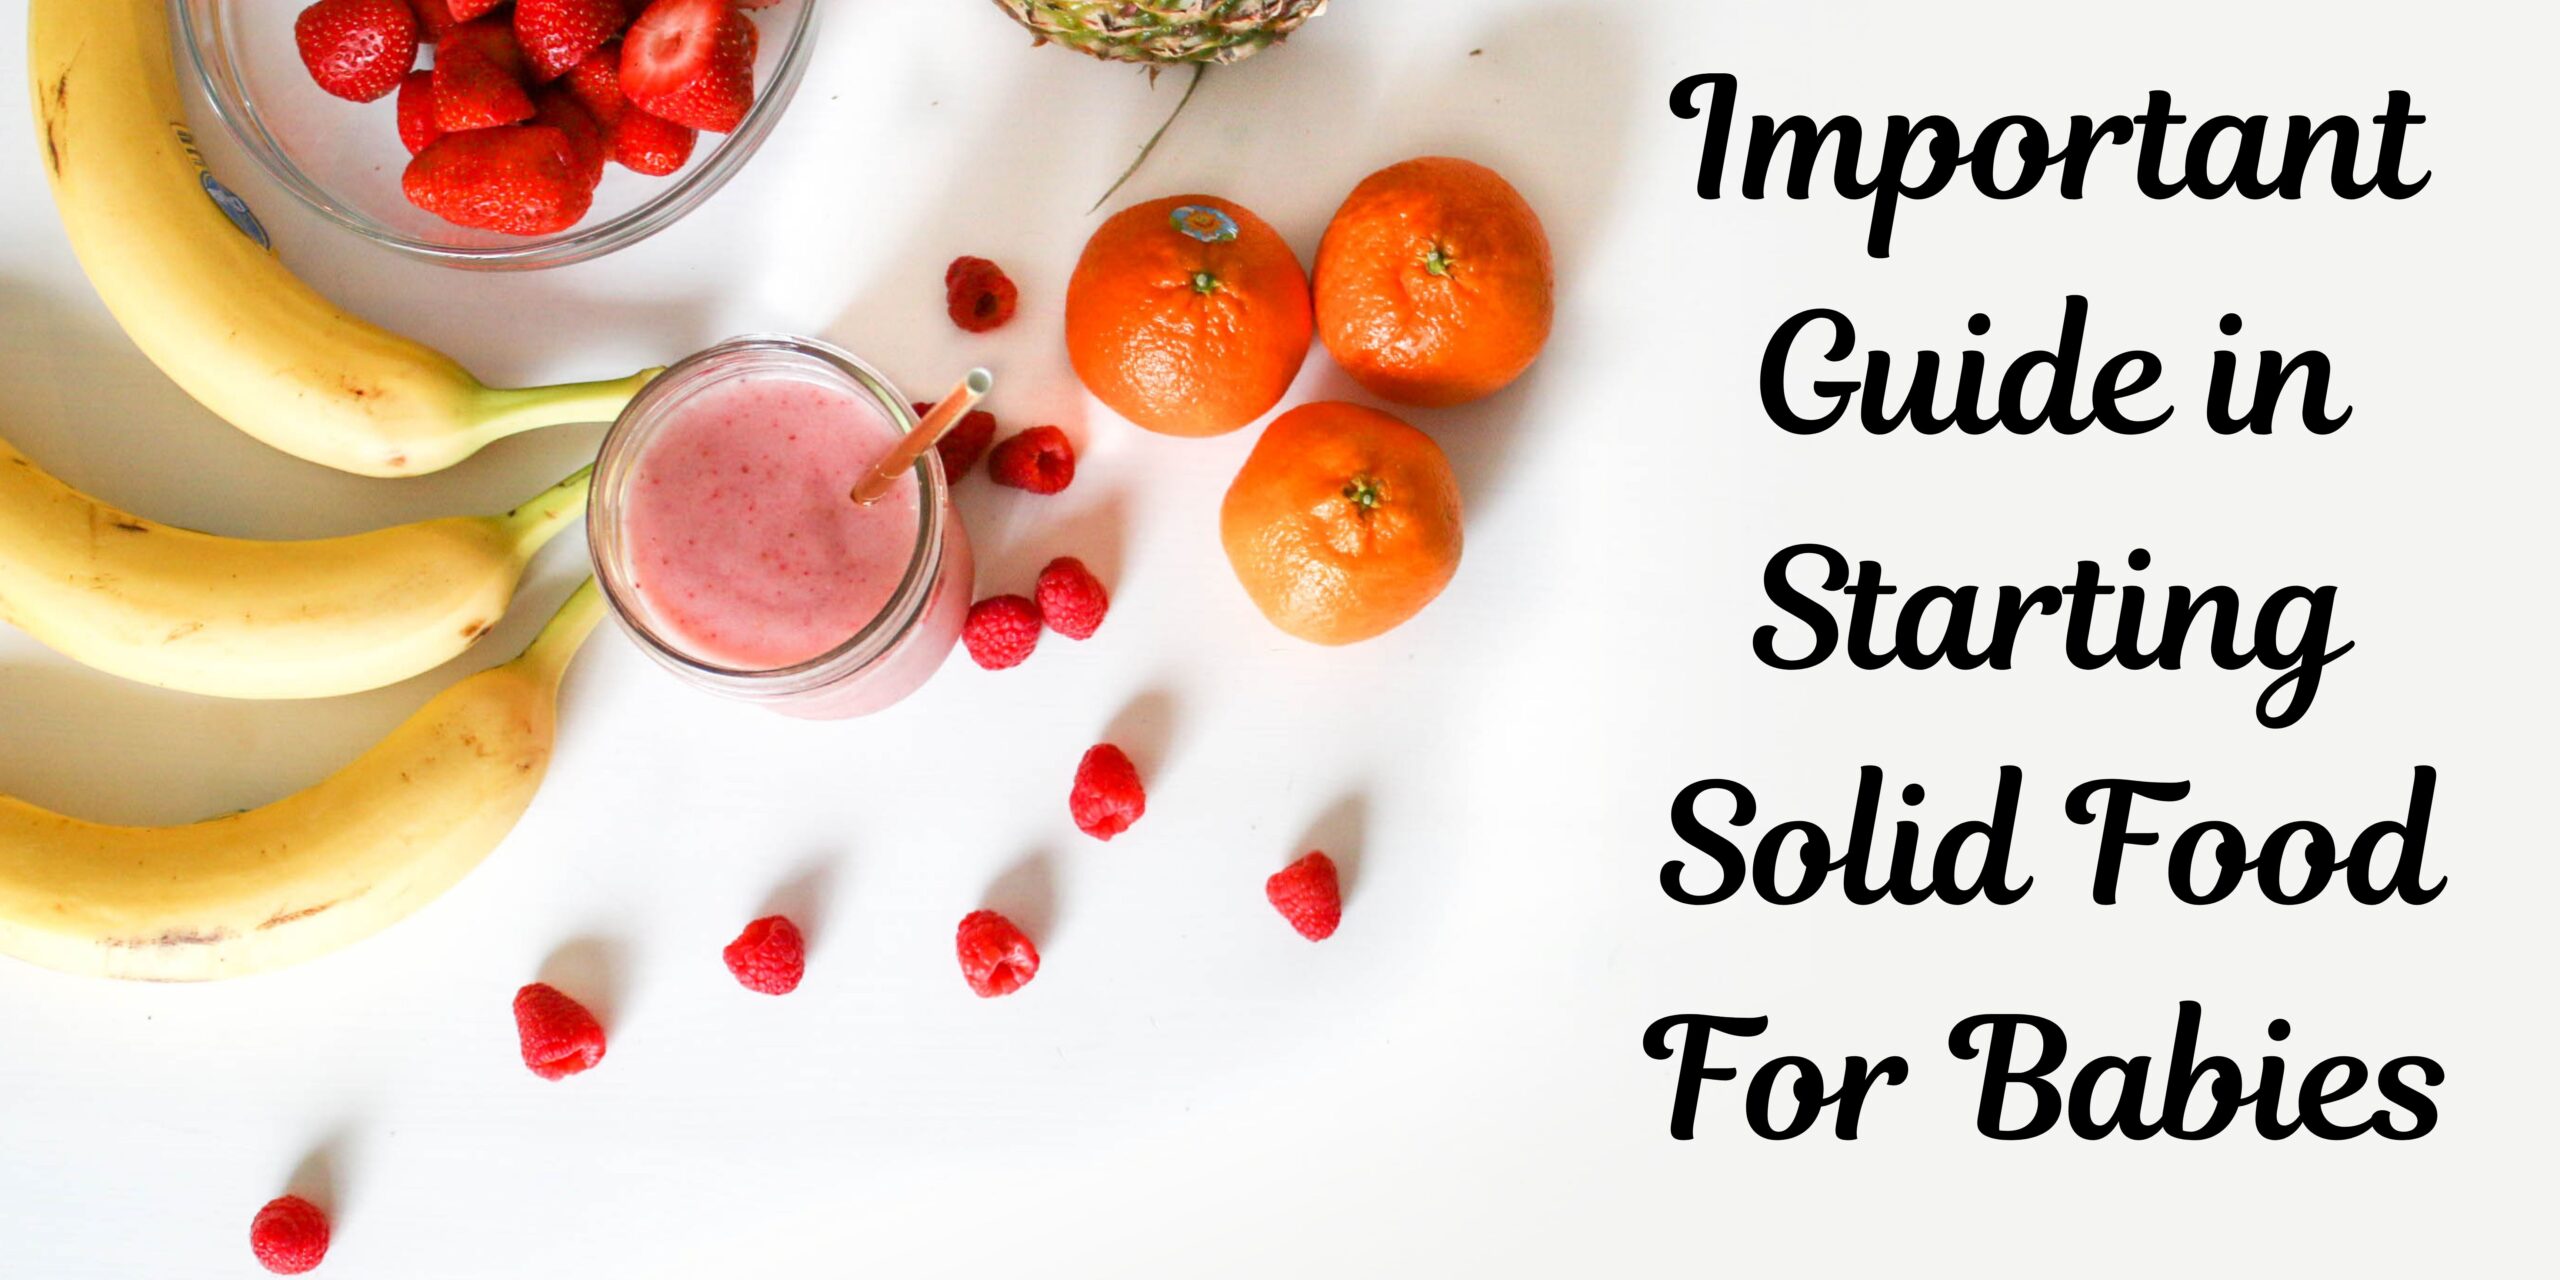 Important Guide in Starting Solid Food For Babies